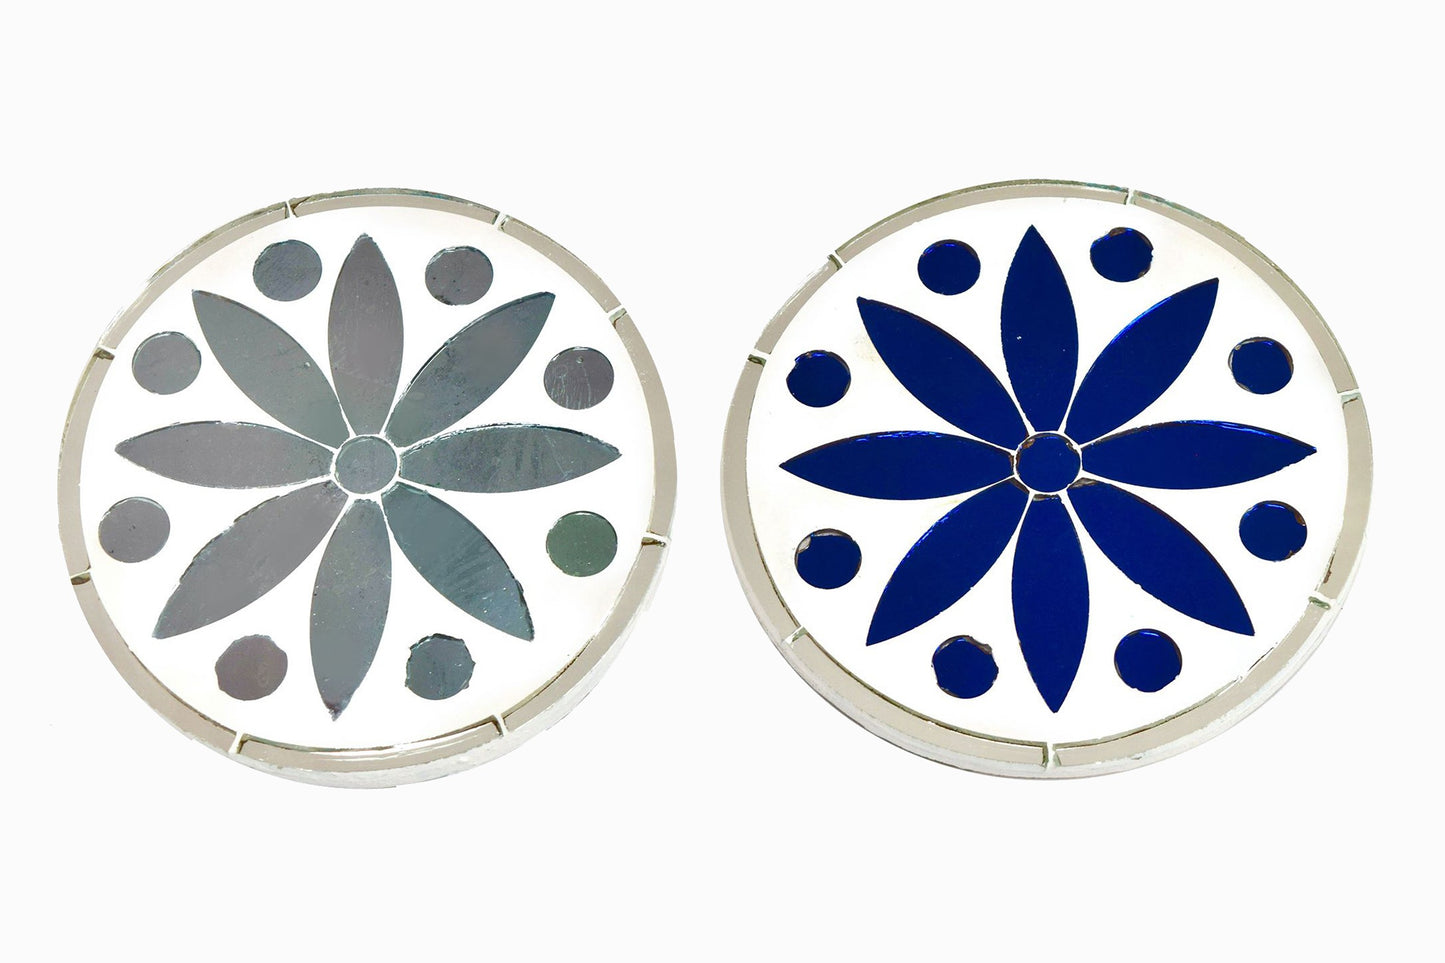 TWO SIDED INLAID MIRROR COASTER BLUE SILVER